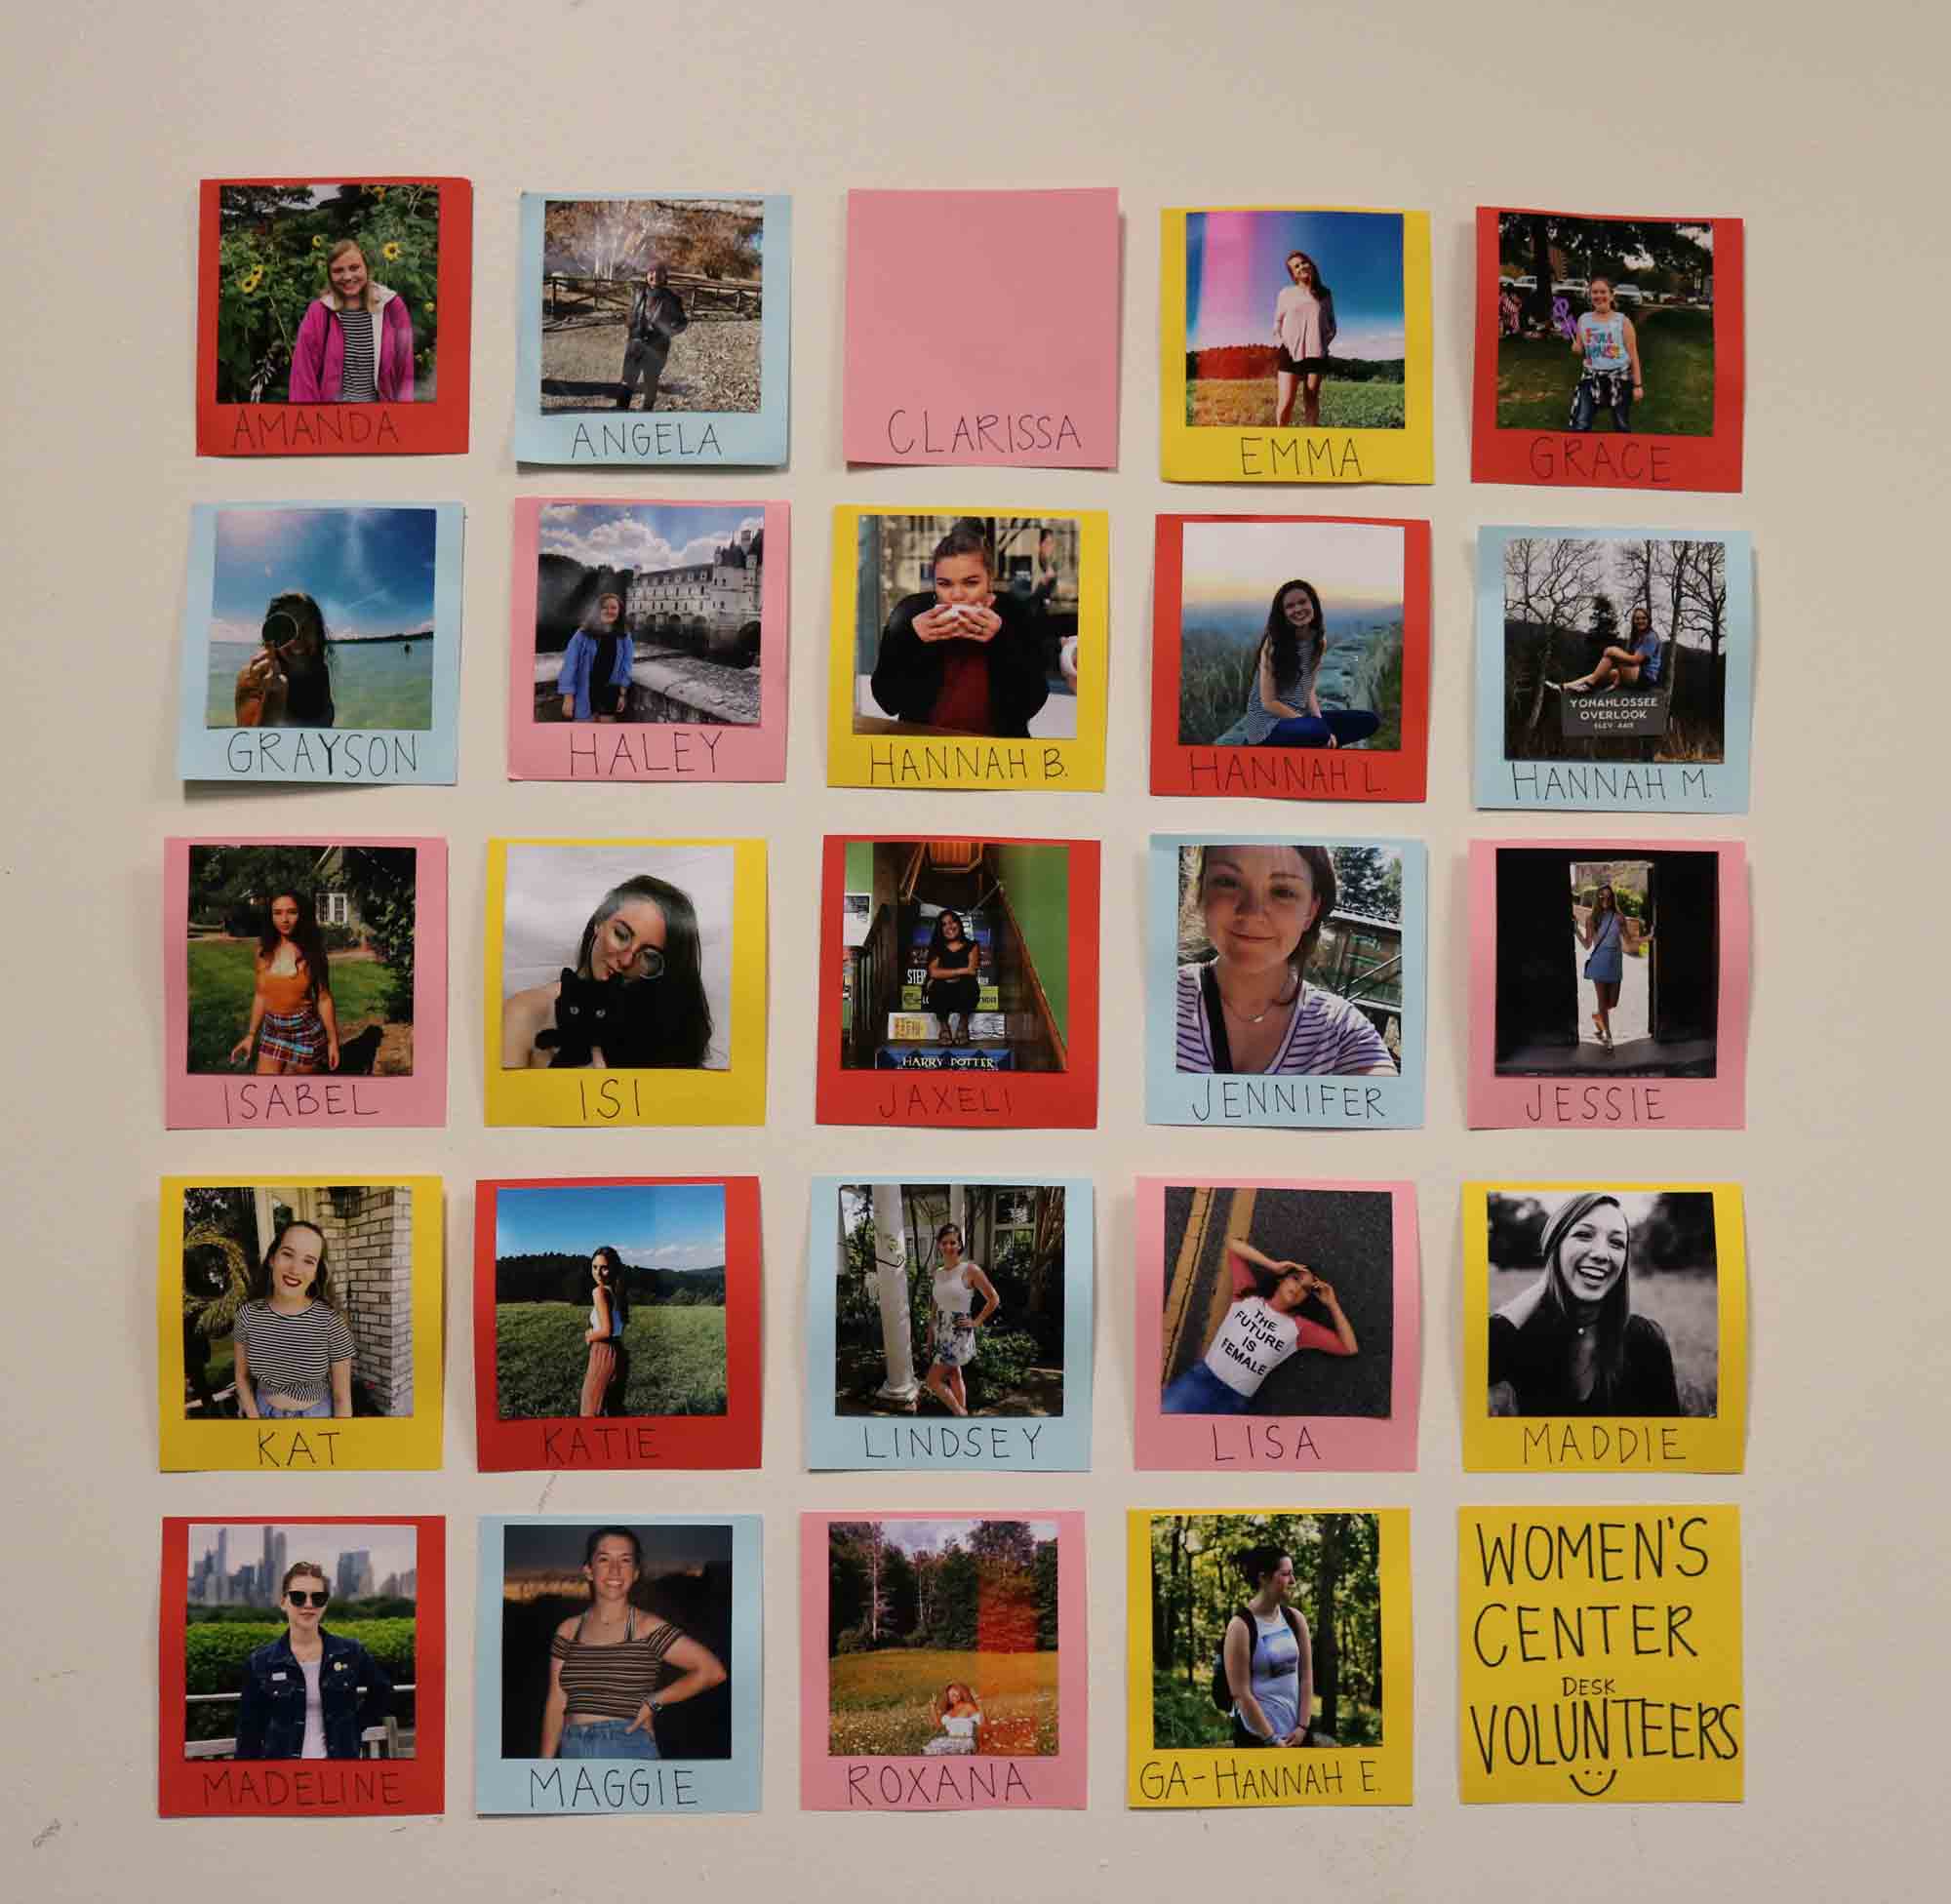 Pictures of volunteers decorate the wall of the Womens Center.